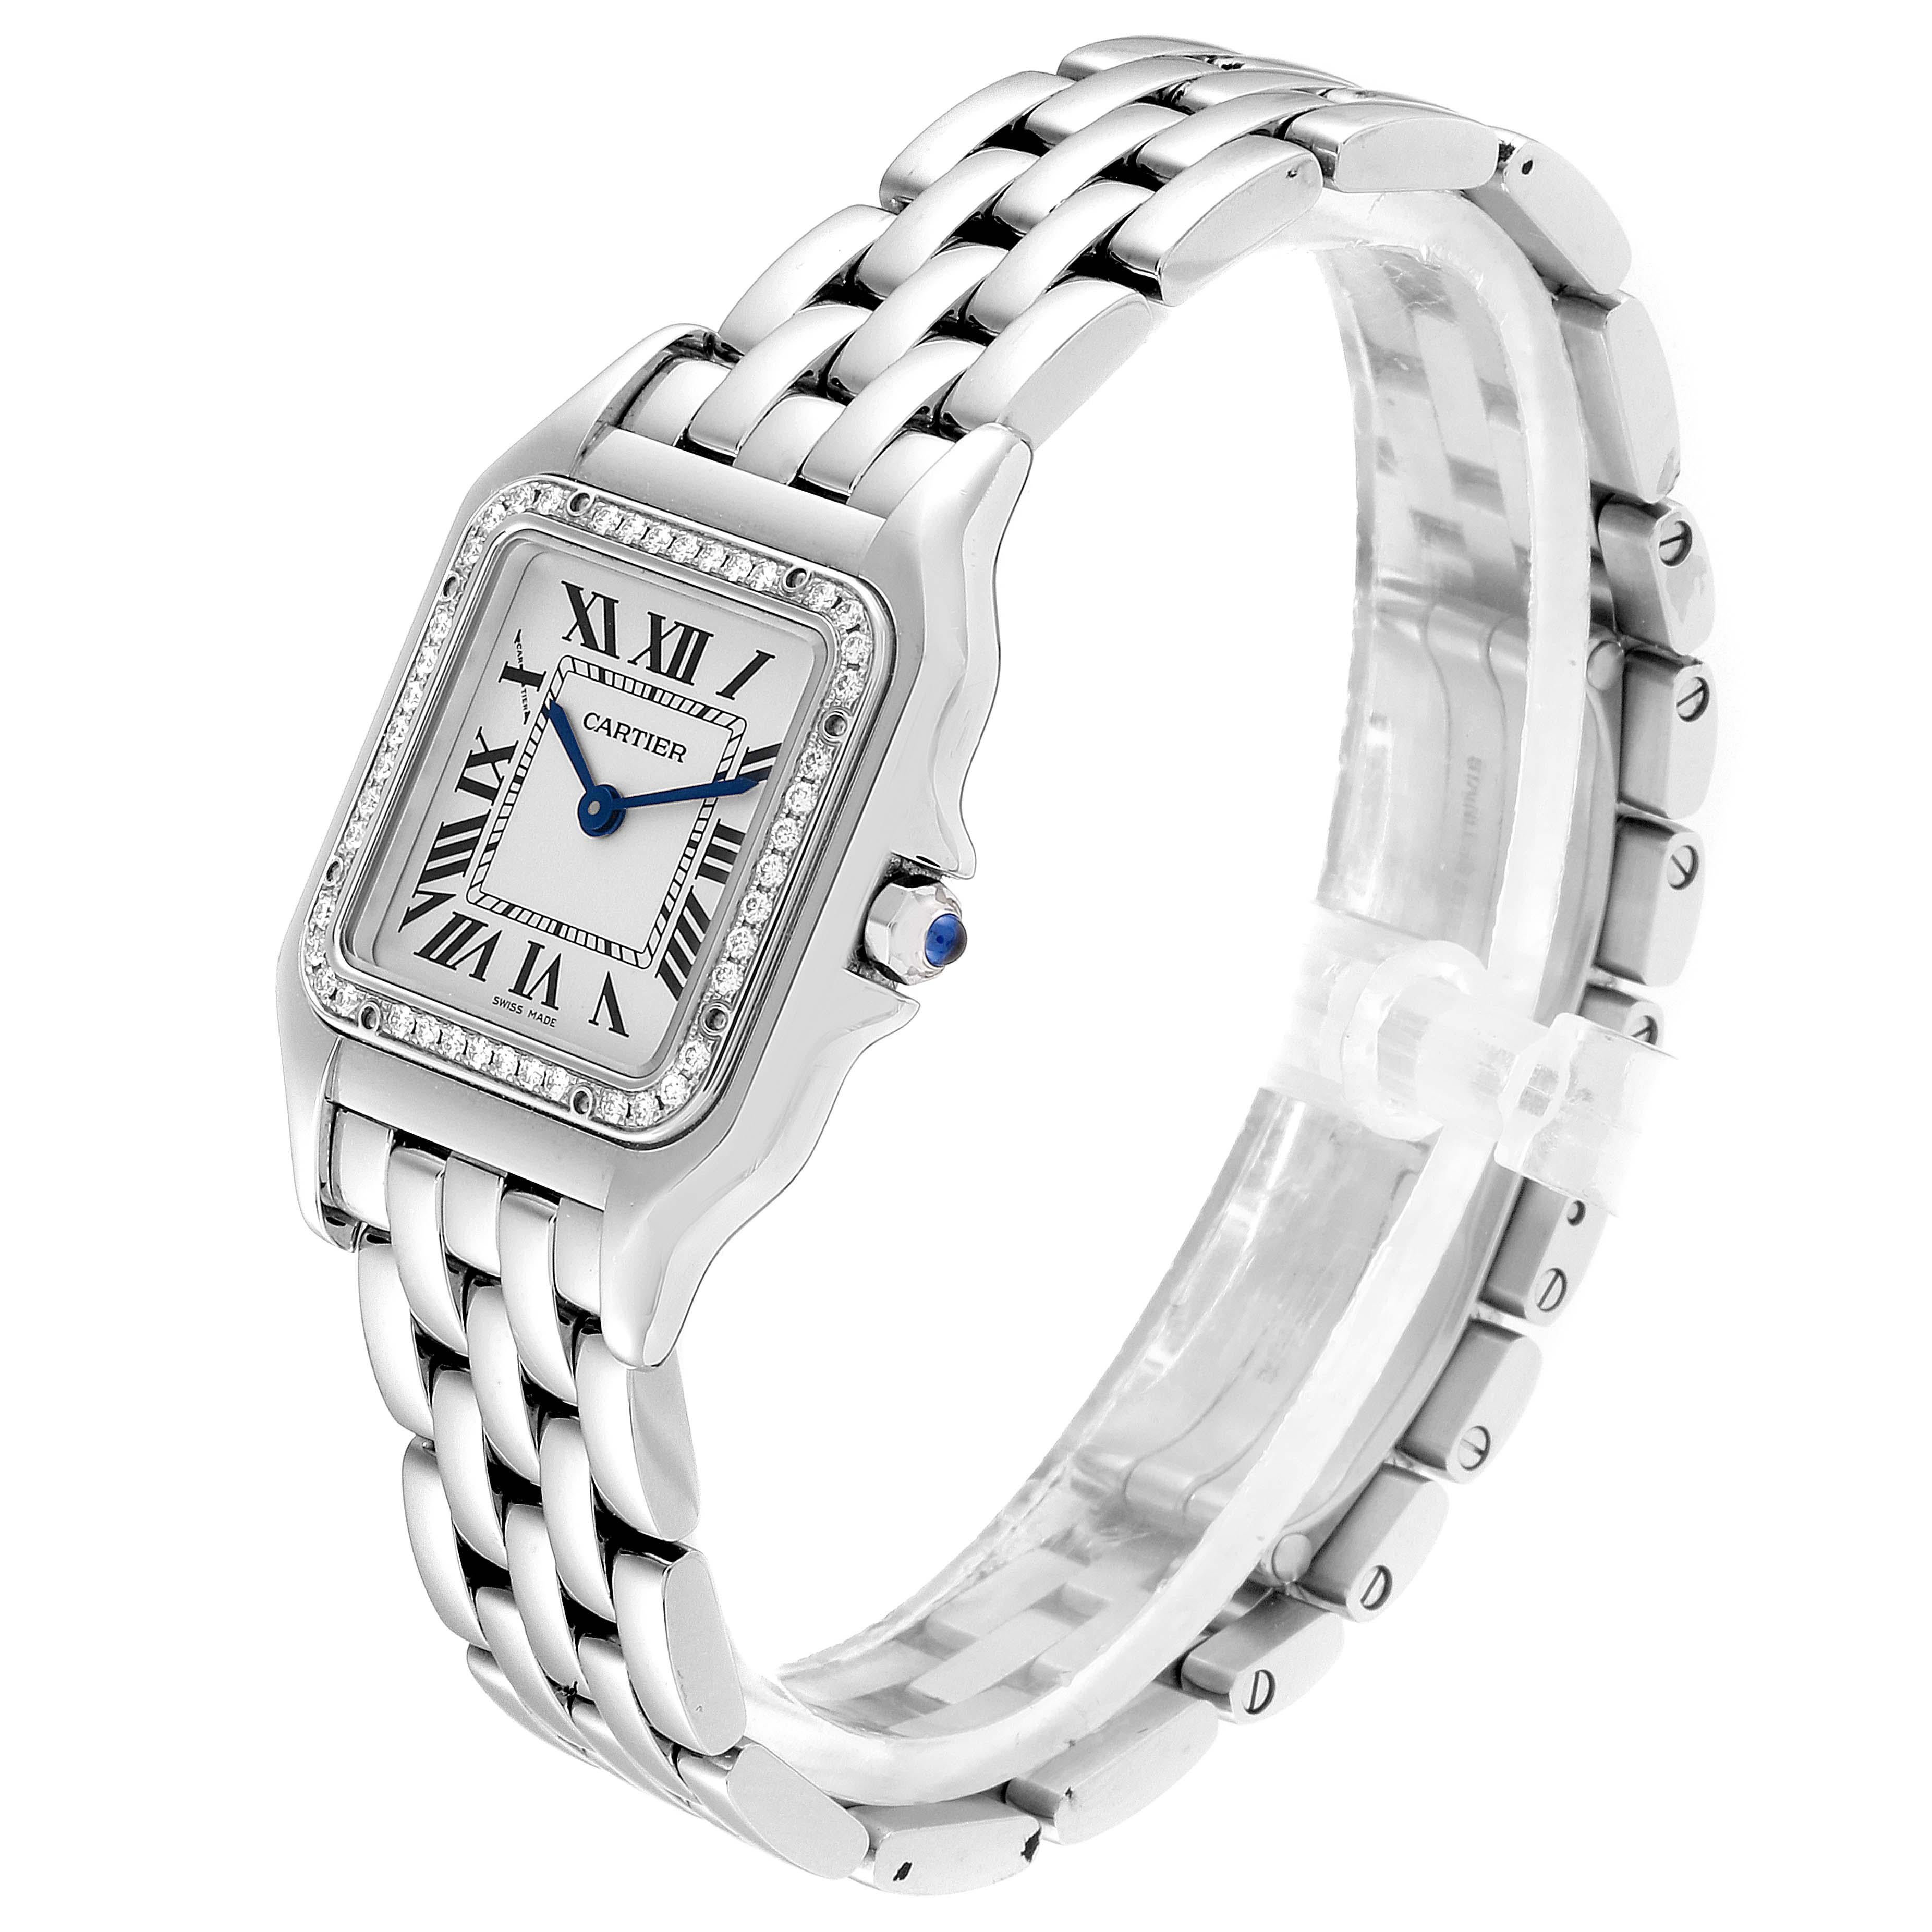 Cartier Panthere Medium Steel Diamond Ladies Watch W4PN0008 In Excellent Condition For Sale In Atlanta, GA